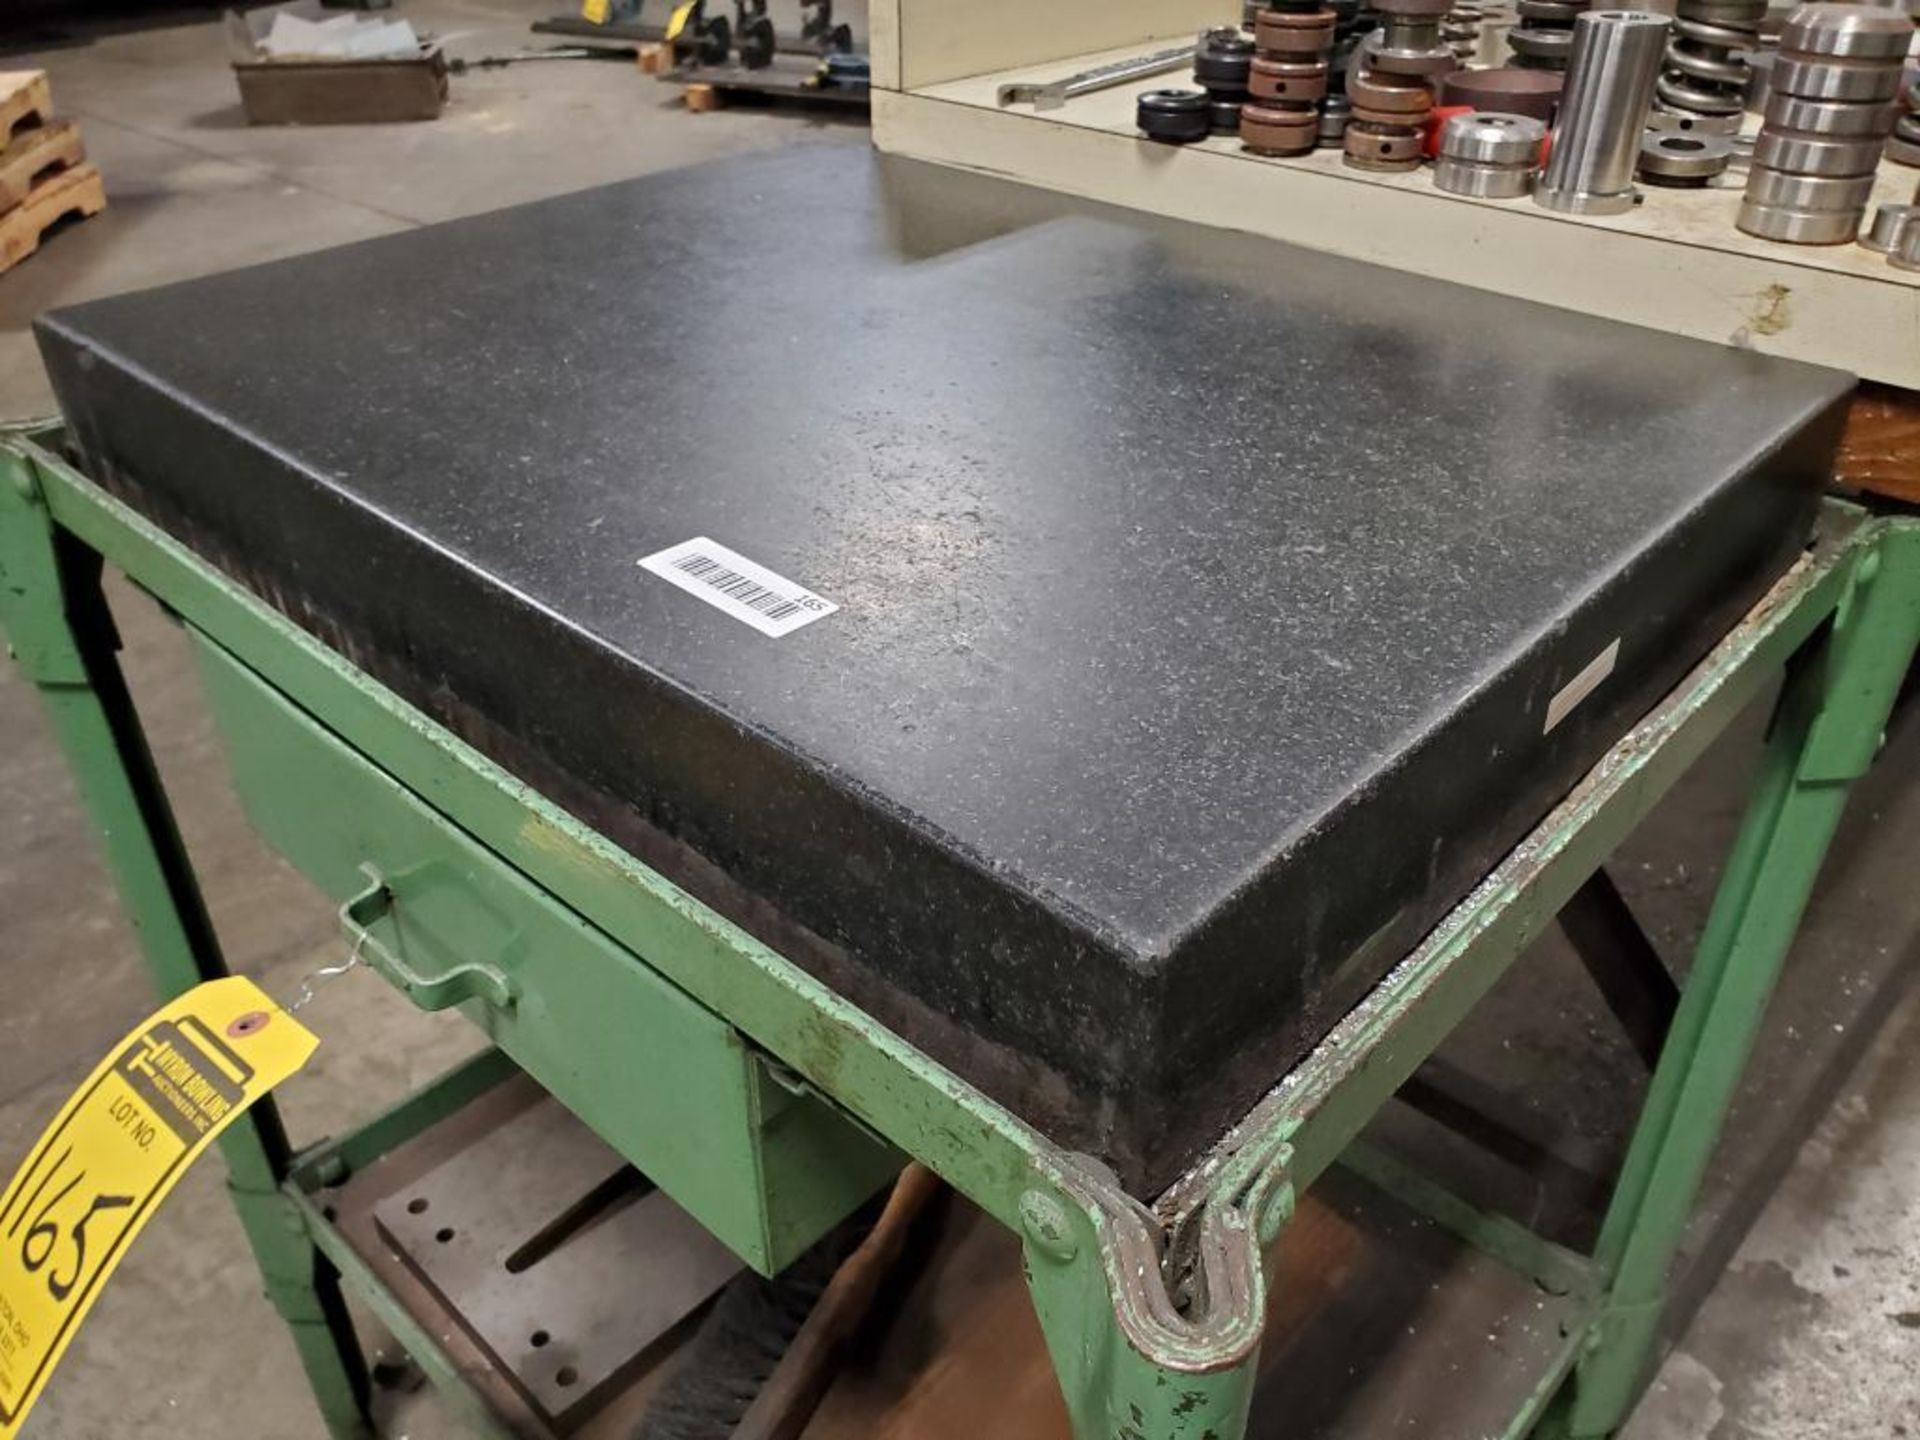 24'' X 18-1/2'' X 3-1/2'' GRANITE SURFACE PLATE ON DRAWER STAND - Image 3 of 3